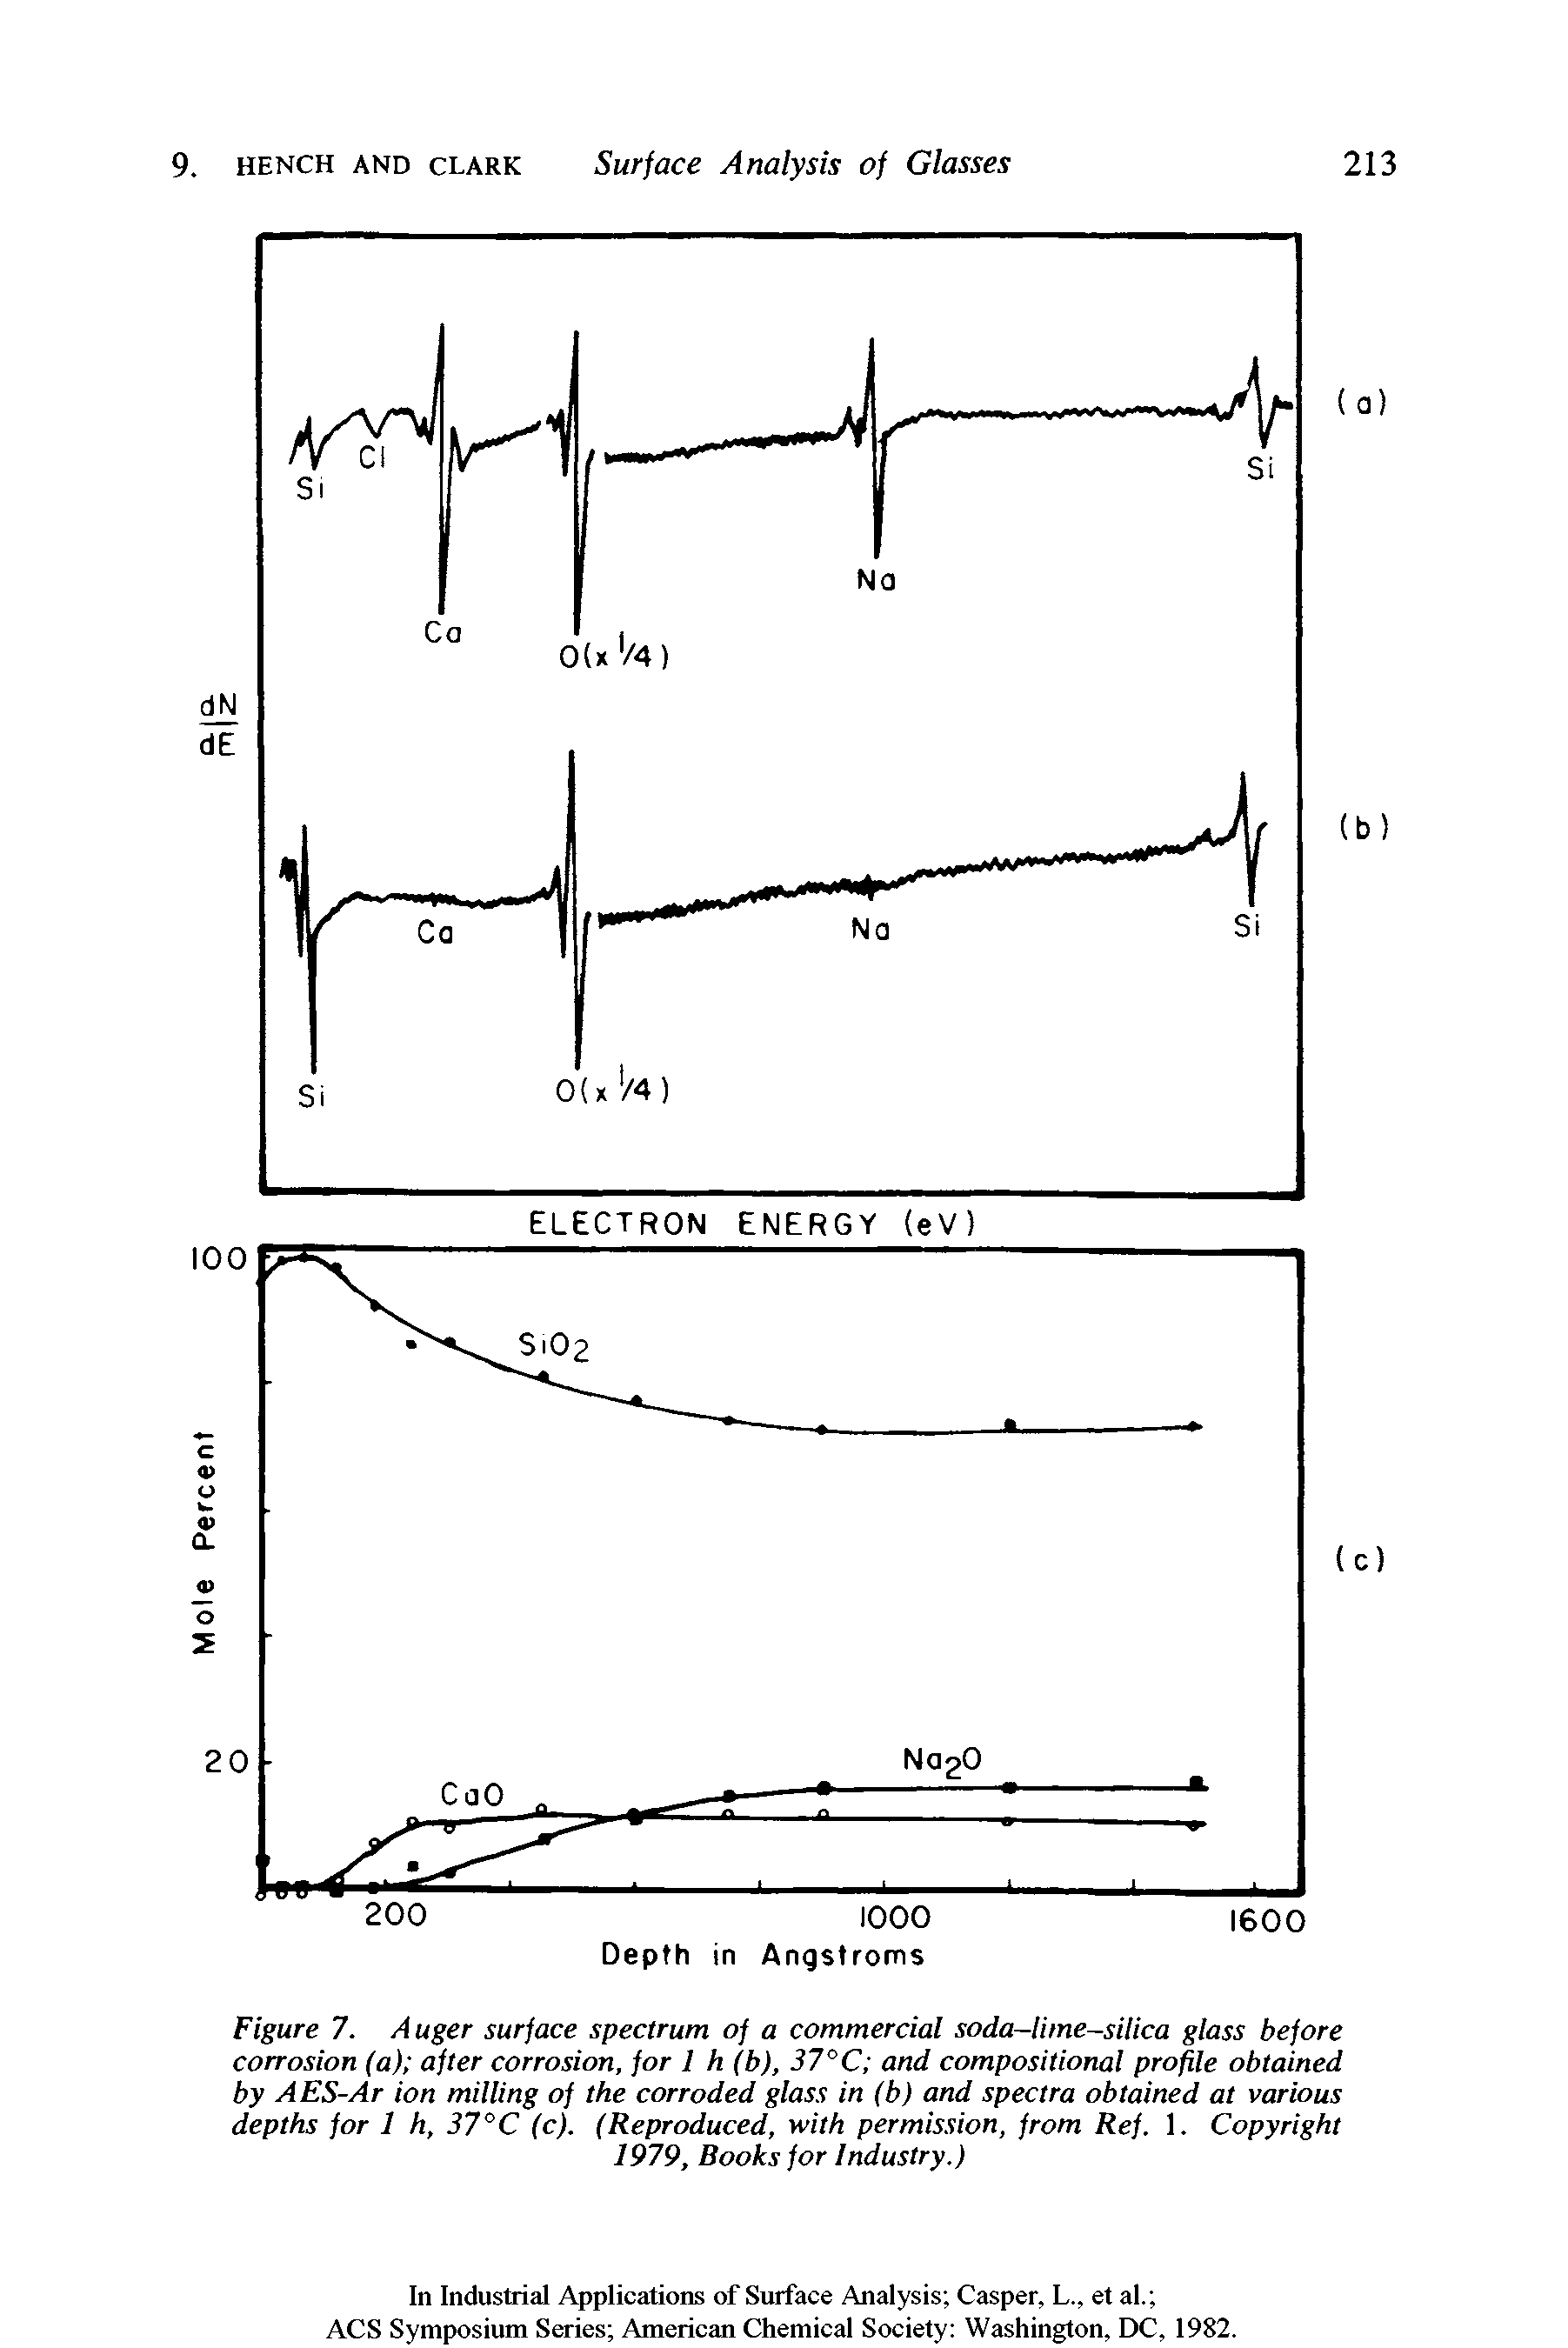 Figure 7. A uger surface spectrum of a commercial soda-lime-silica glass before corrosion (a) after corrosion, for 1 h (b), 37°C and compositional profile obtained by AES-Ar ion milling of the corroded glass in (b) and spectra obtained at various depths for 1 h, 37°C (c). (Reproduced, with permission, from Ref. 1. Copyright 1979, Books for Industry.)...